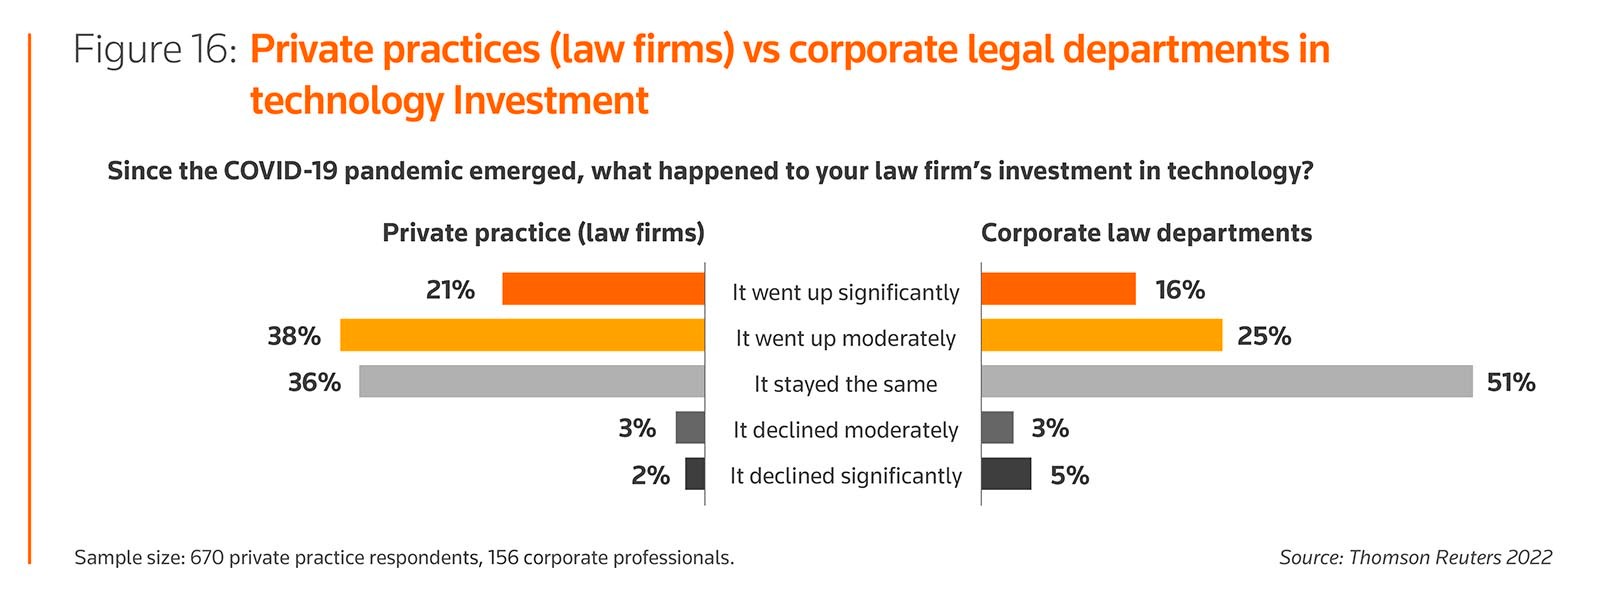 Private practices/law firms vs corporate legal departments in technology investment